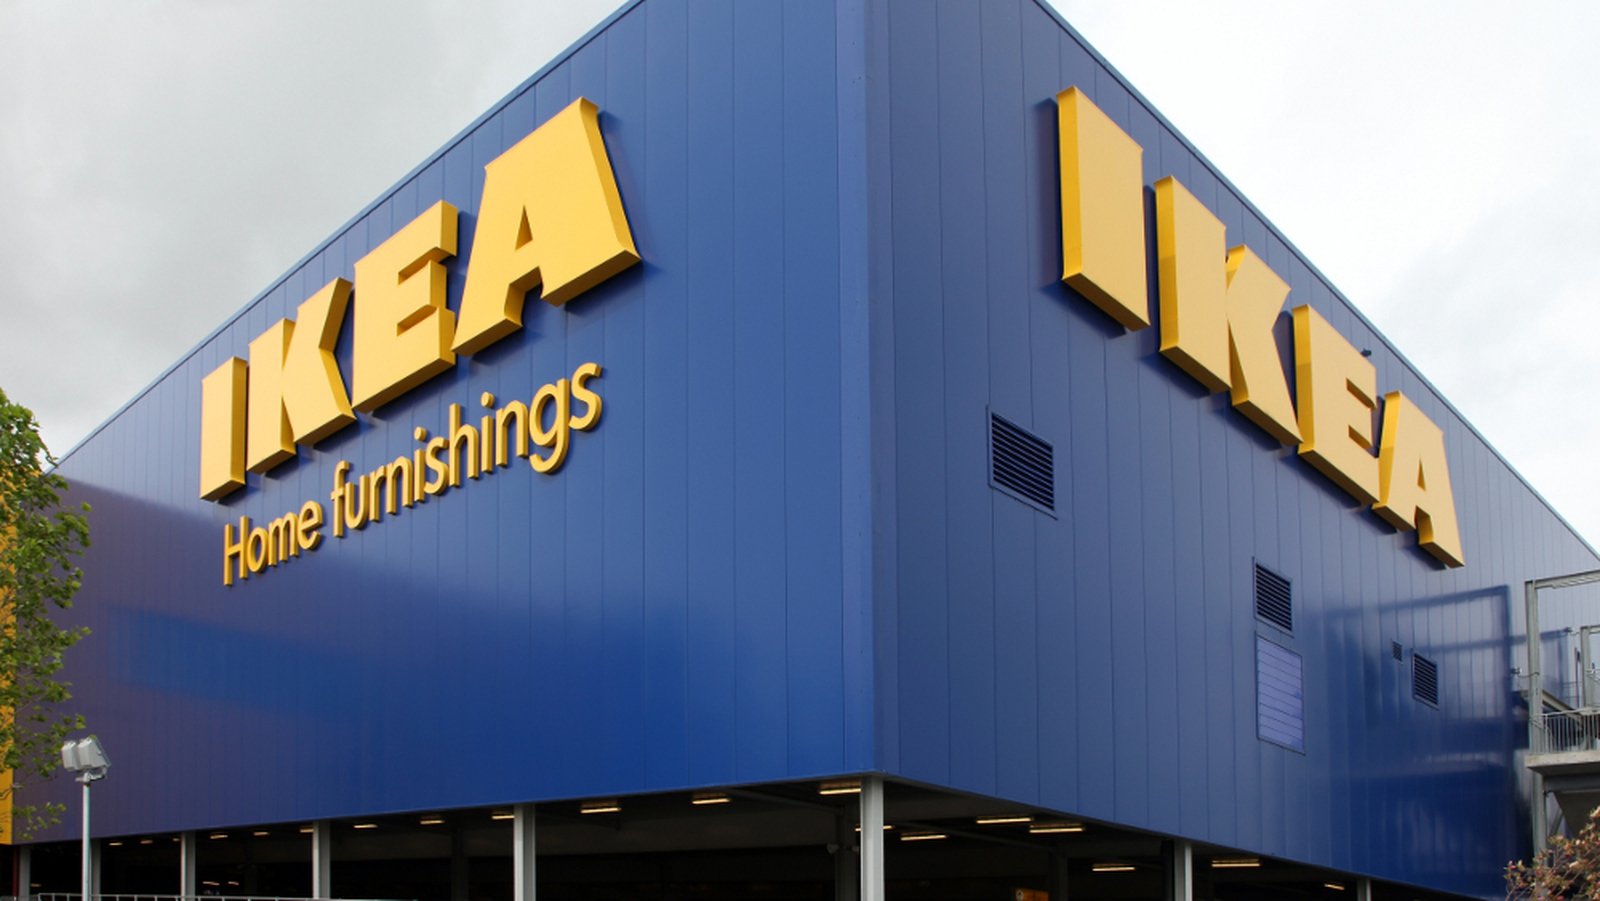 IKEA Dublin to pay staff 'Living Wage' of €11.50